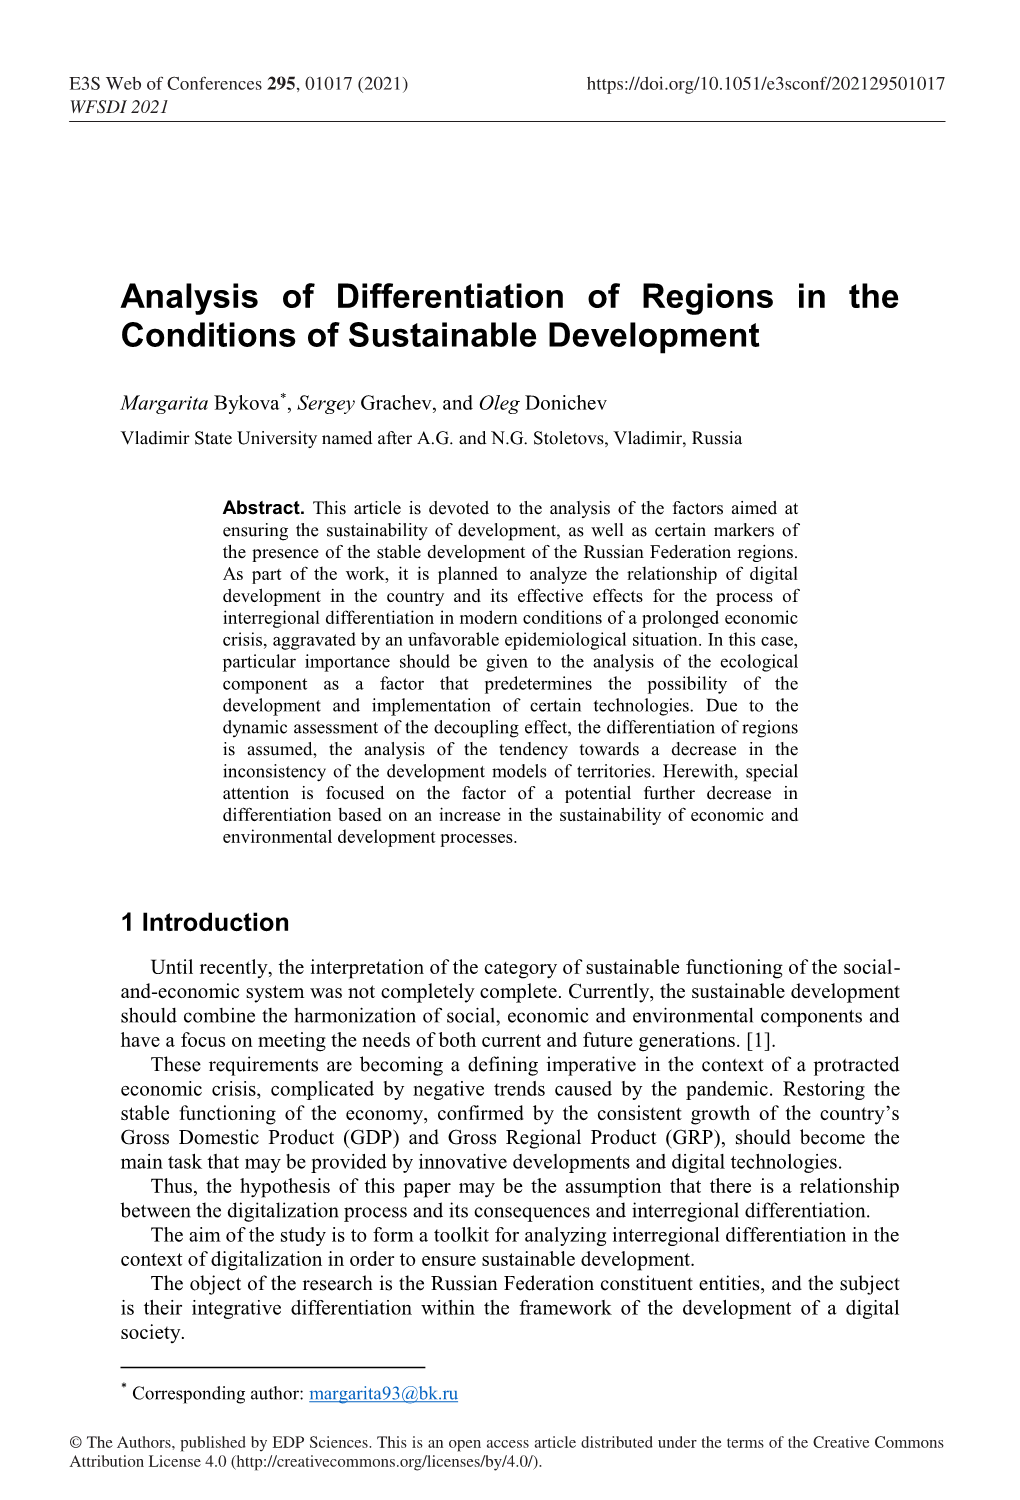 Analysis of Differentiation of Regions in the Conditions of Sustainable Development